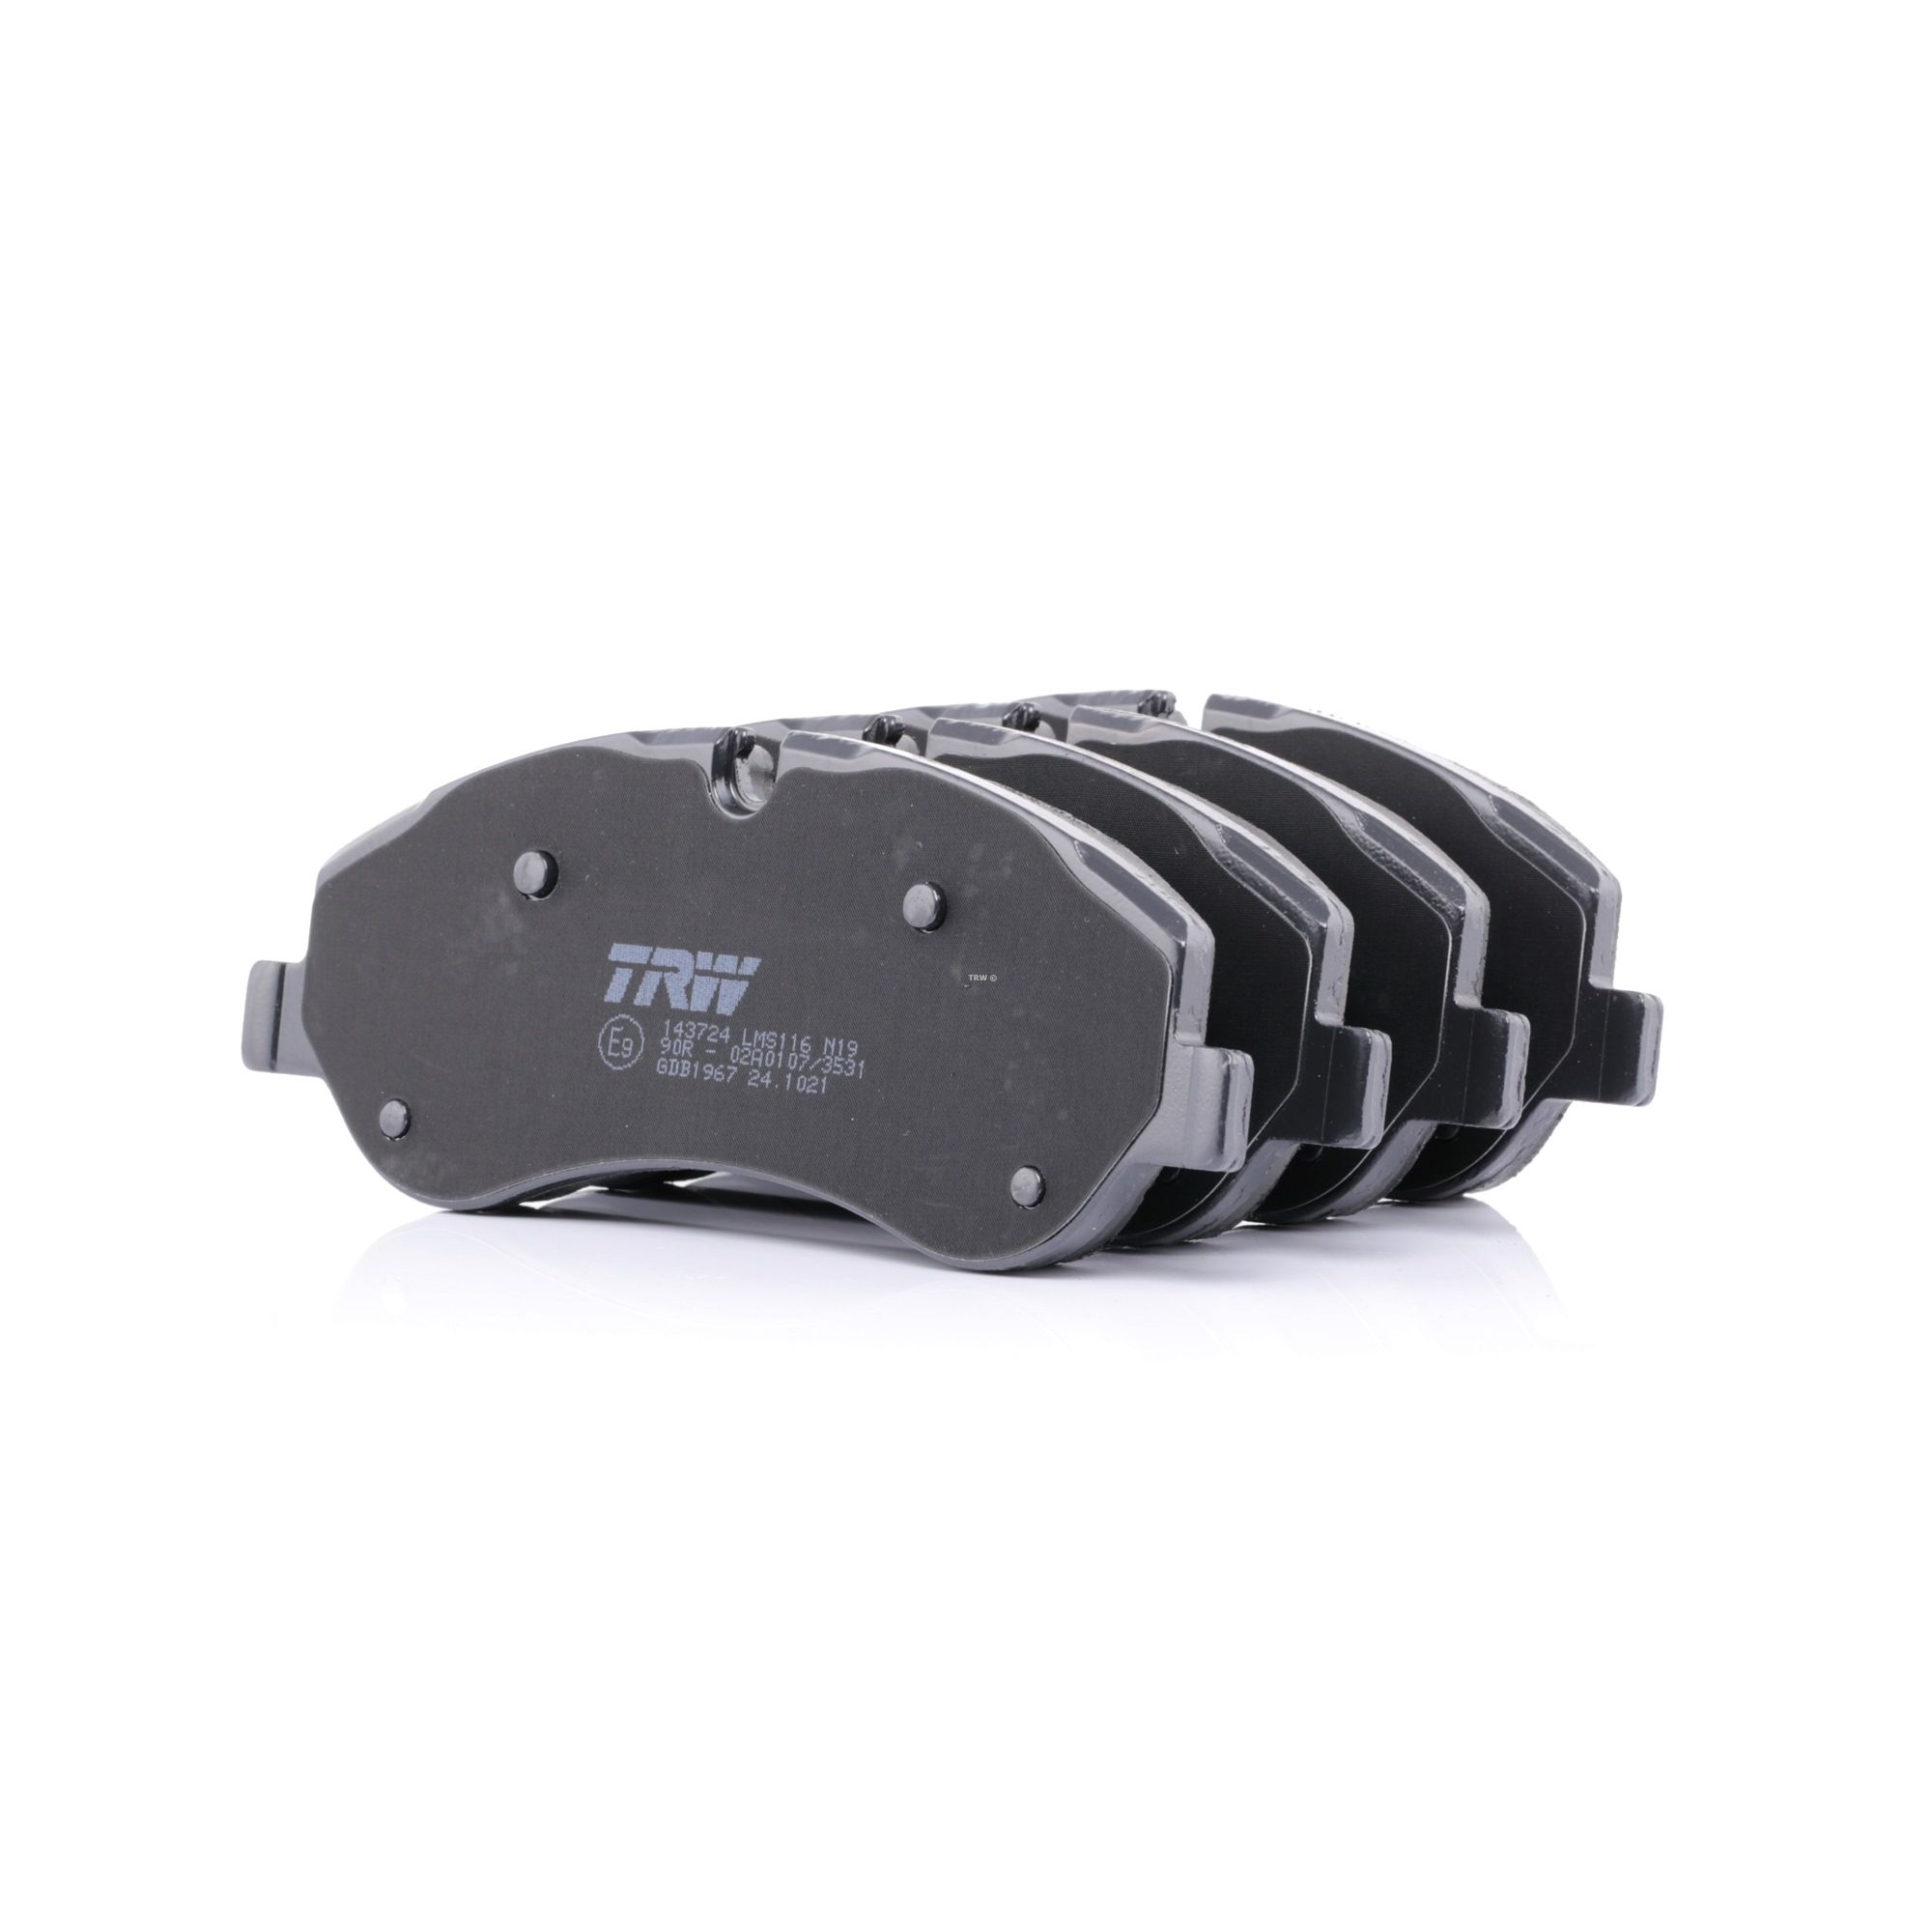 25602 TRW COTEC, incl. wear warning contact Height: 68,8mm, Width: 171,8mm, Thickness: 17,0mm Brake pads GDB1967 buy